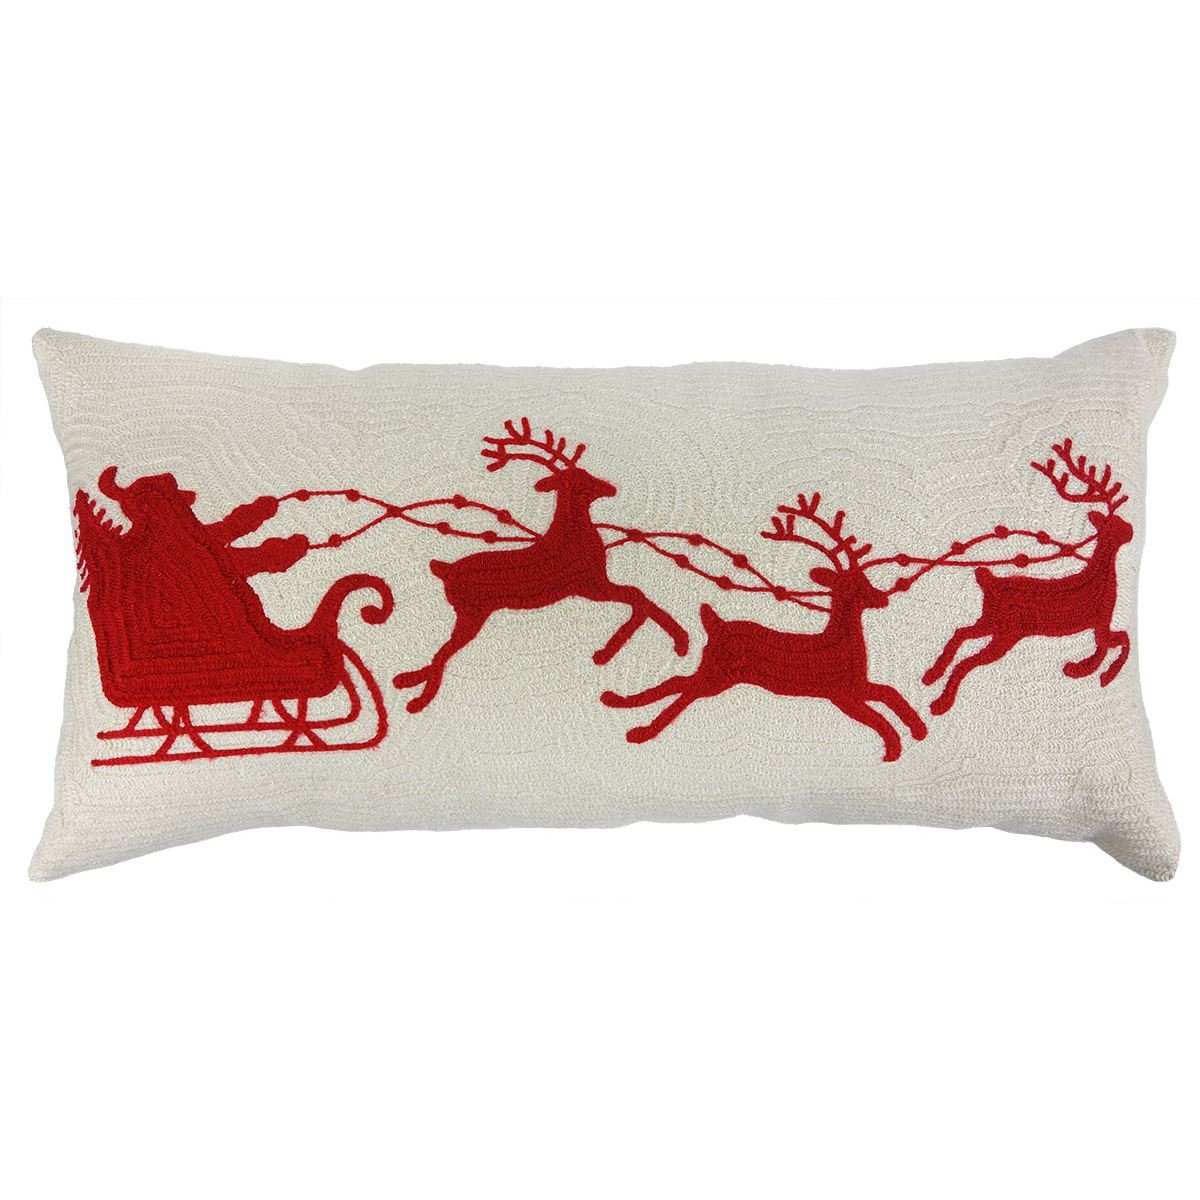 Santa in Sleigh with Reindeer-Red Stitching Pillow